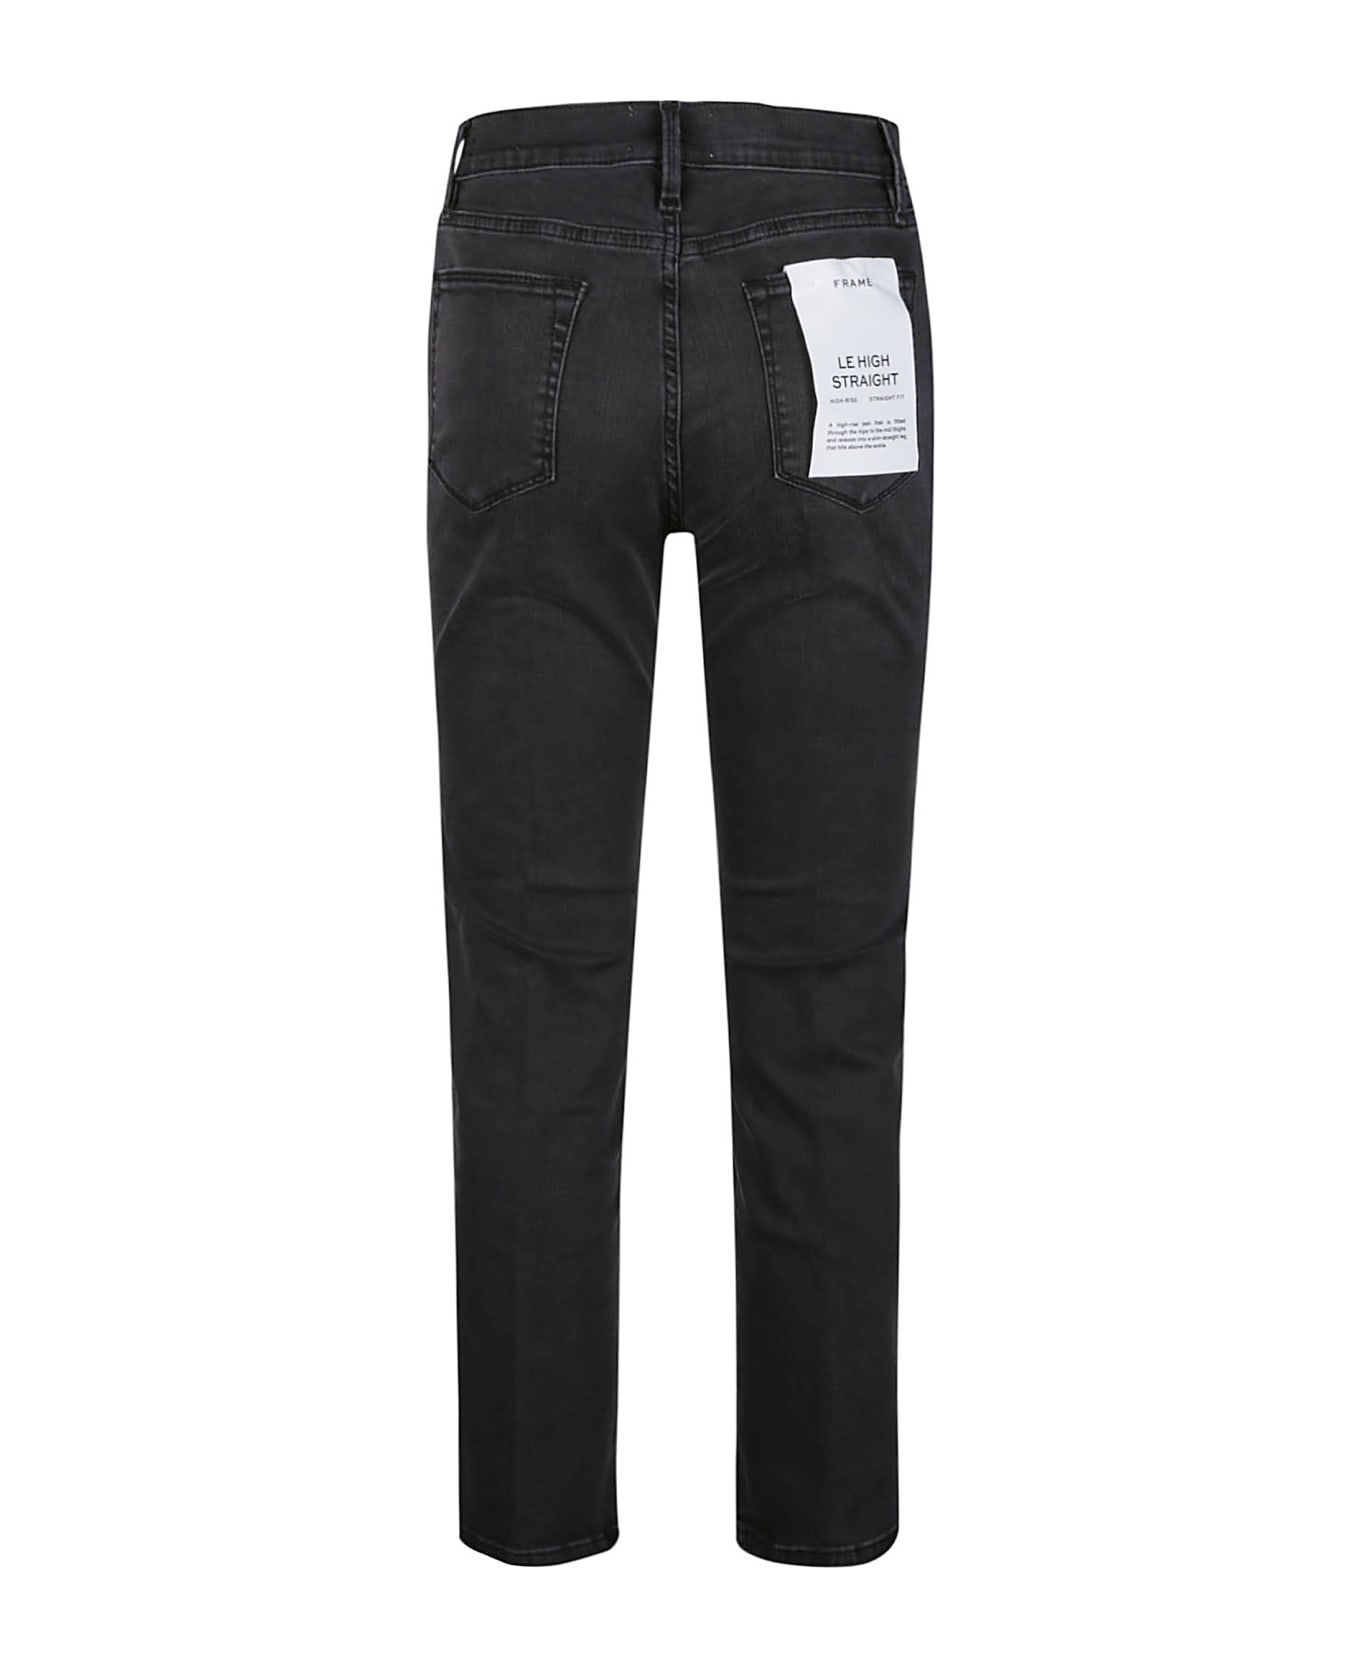 Frame Le High Straight Jeans - Mrdl Mardel